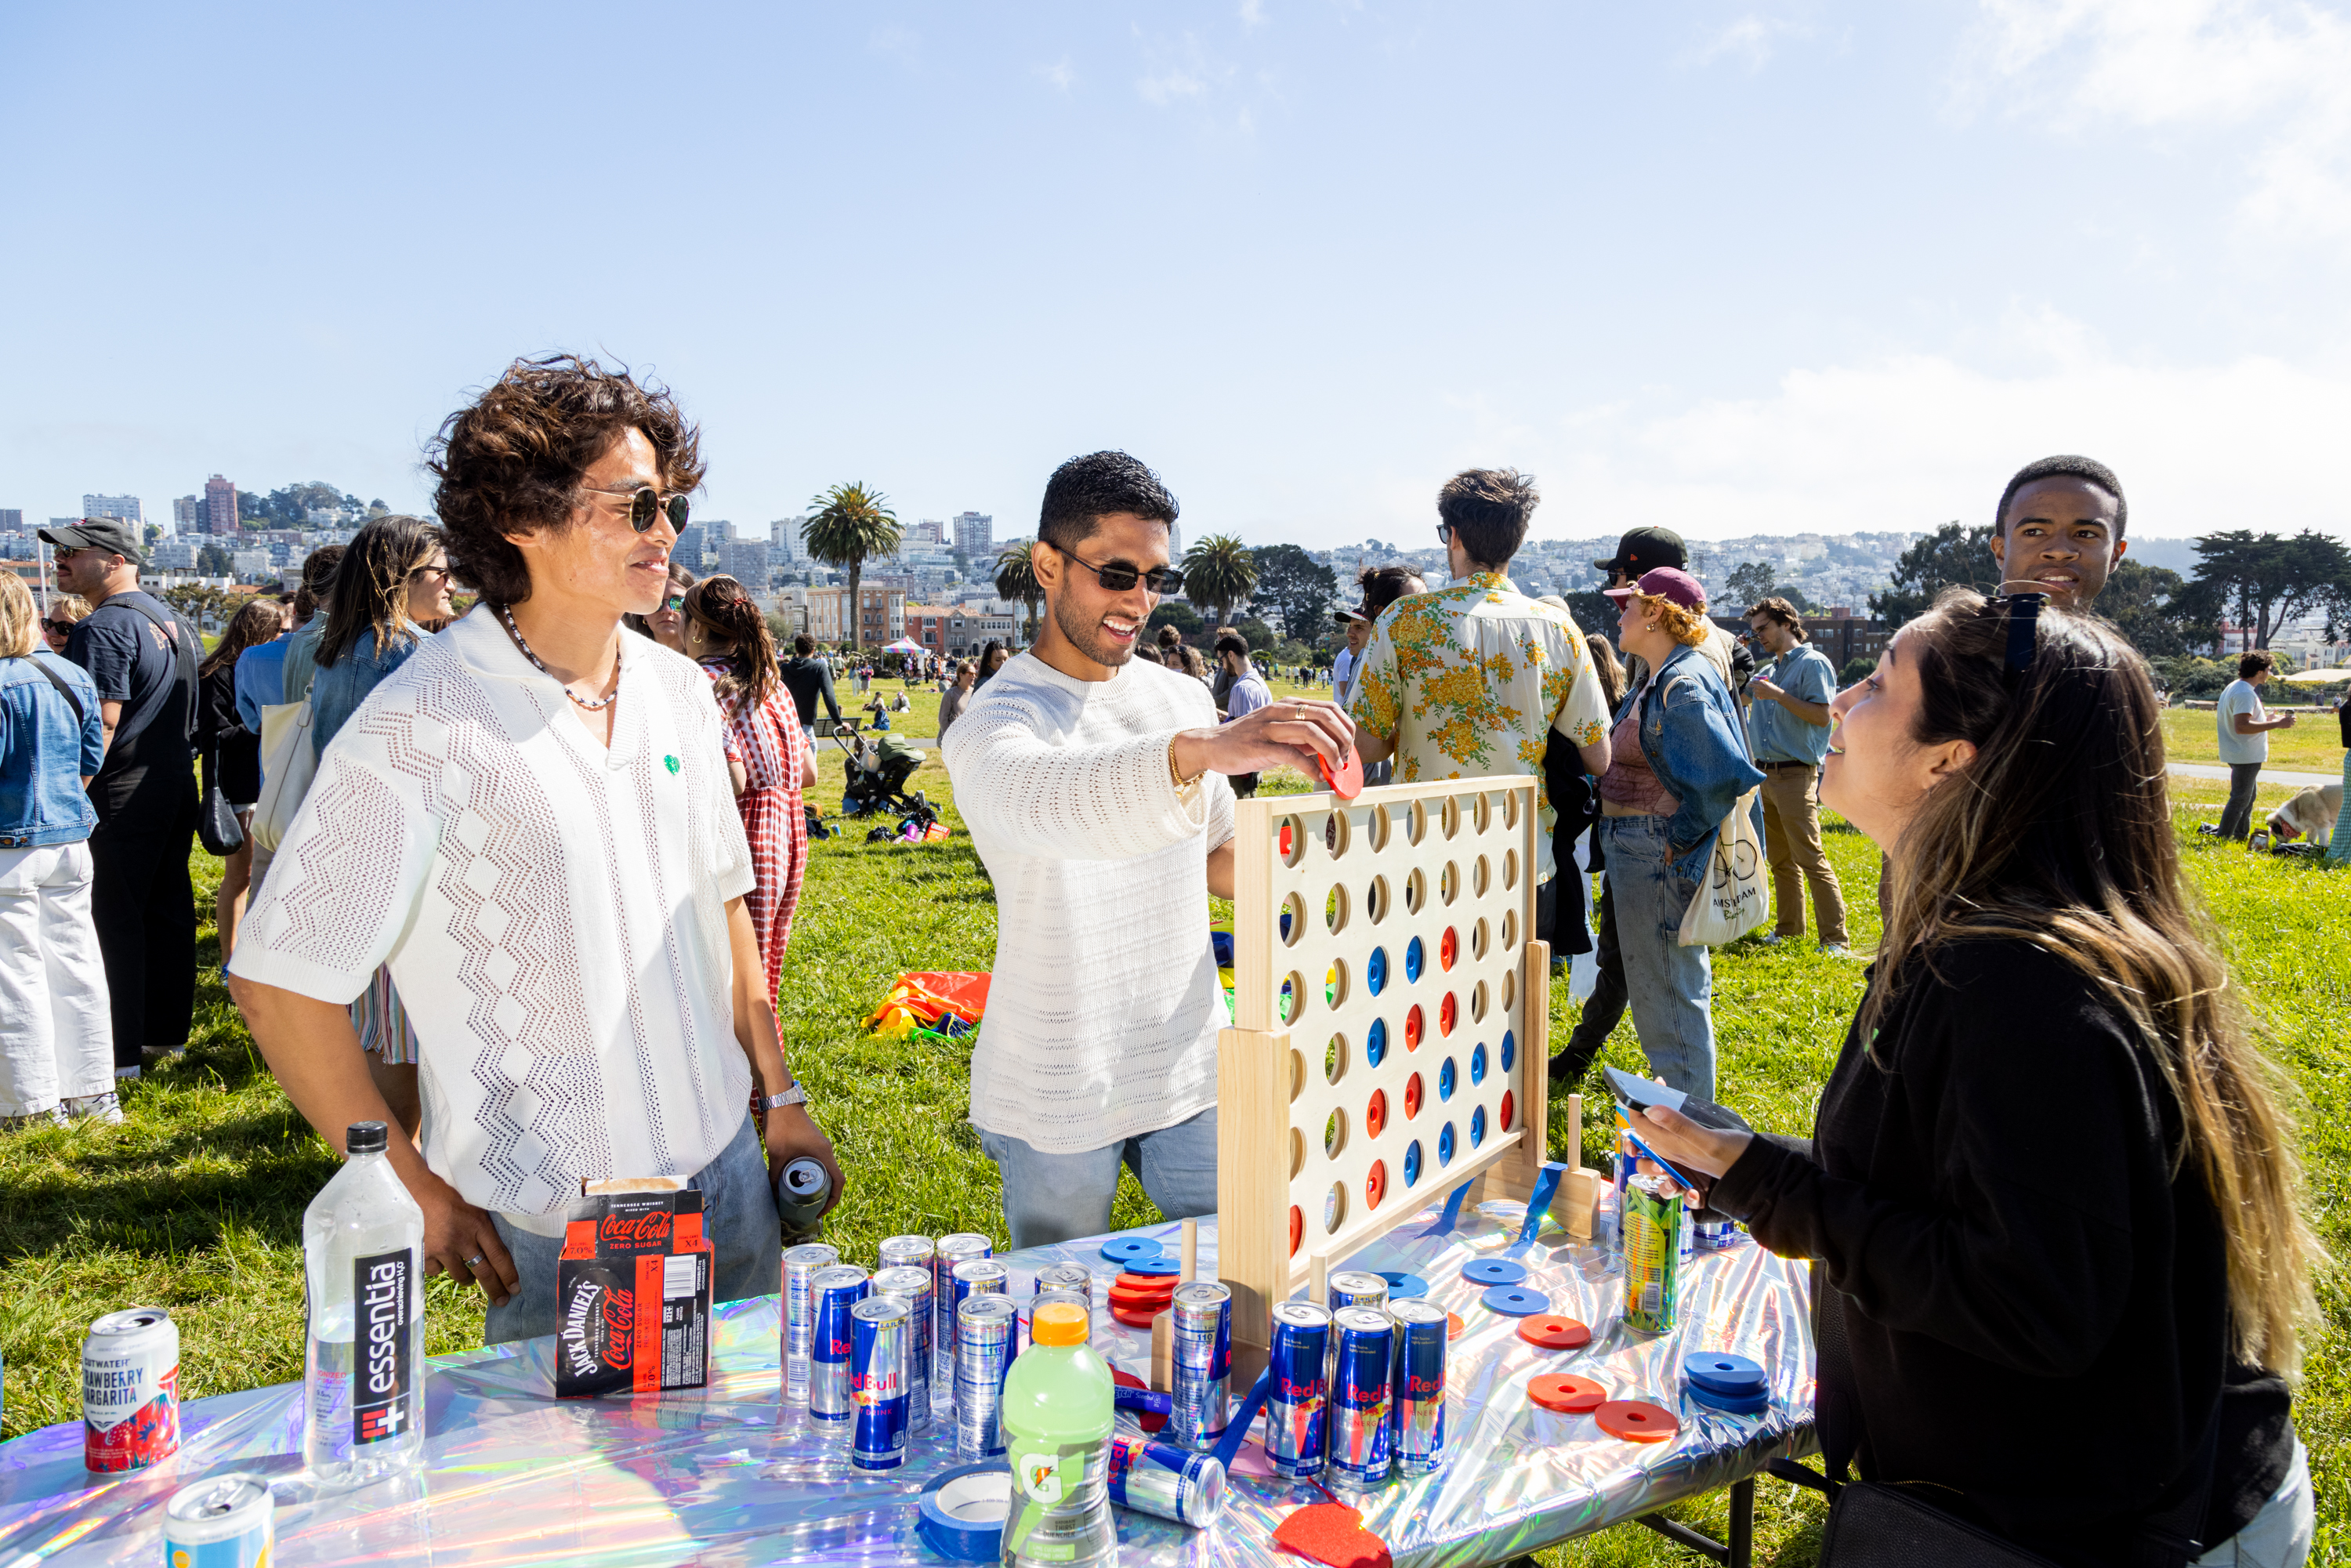 People play a Connect Four game at a sunny park gathering, with a city skyline in the background. Drinks and snacks are on the table.